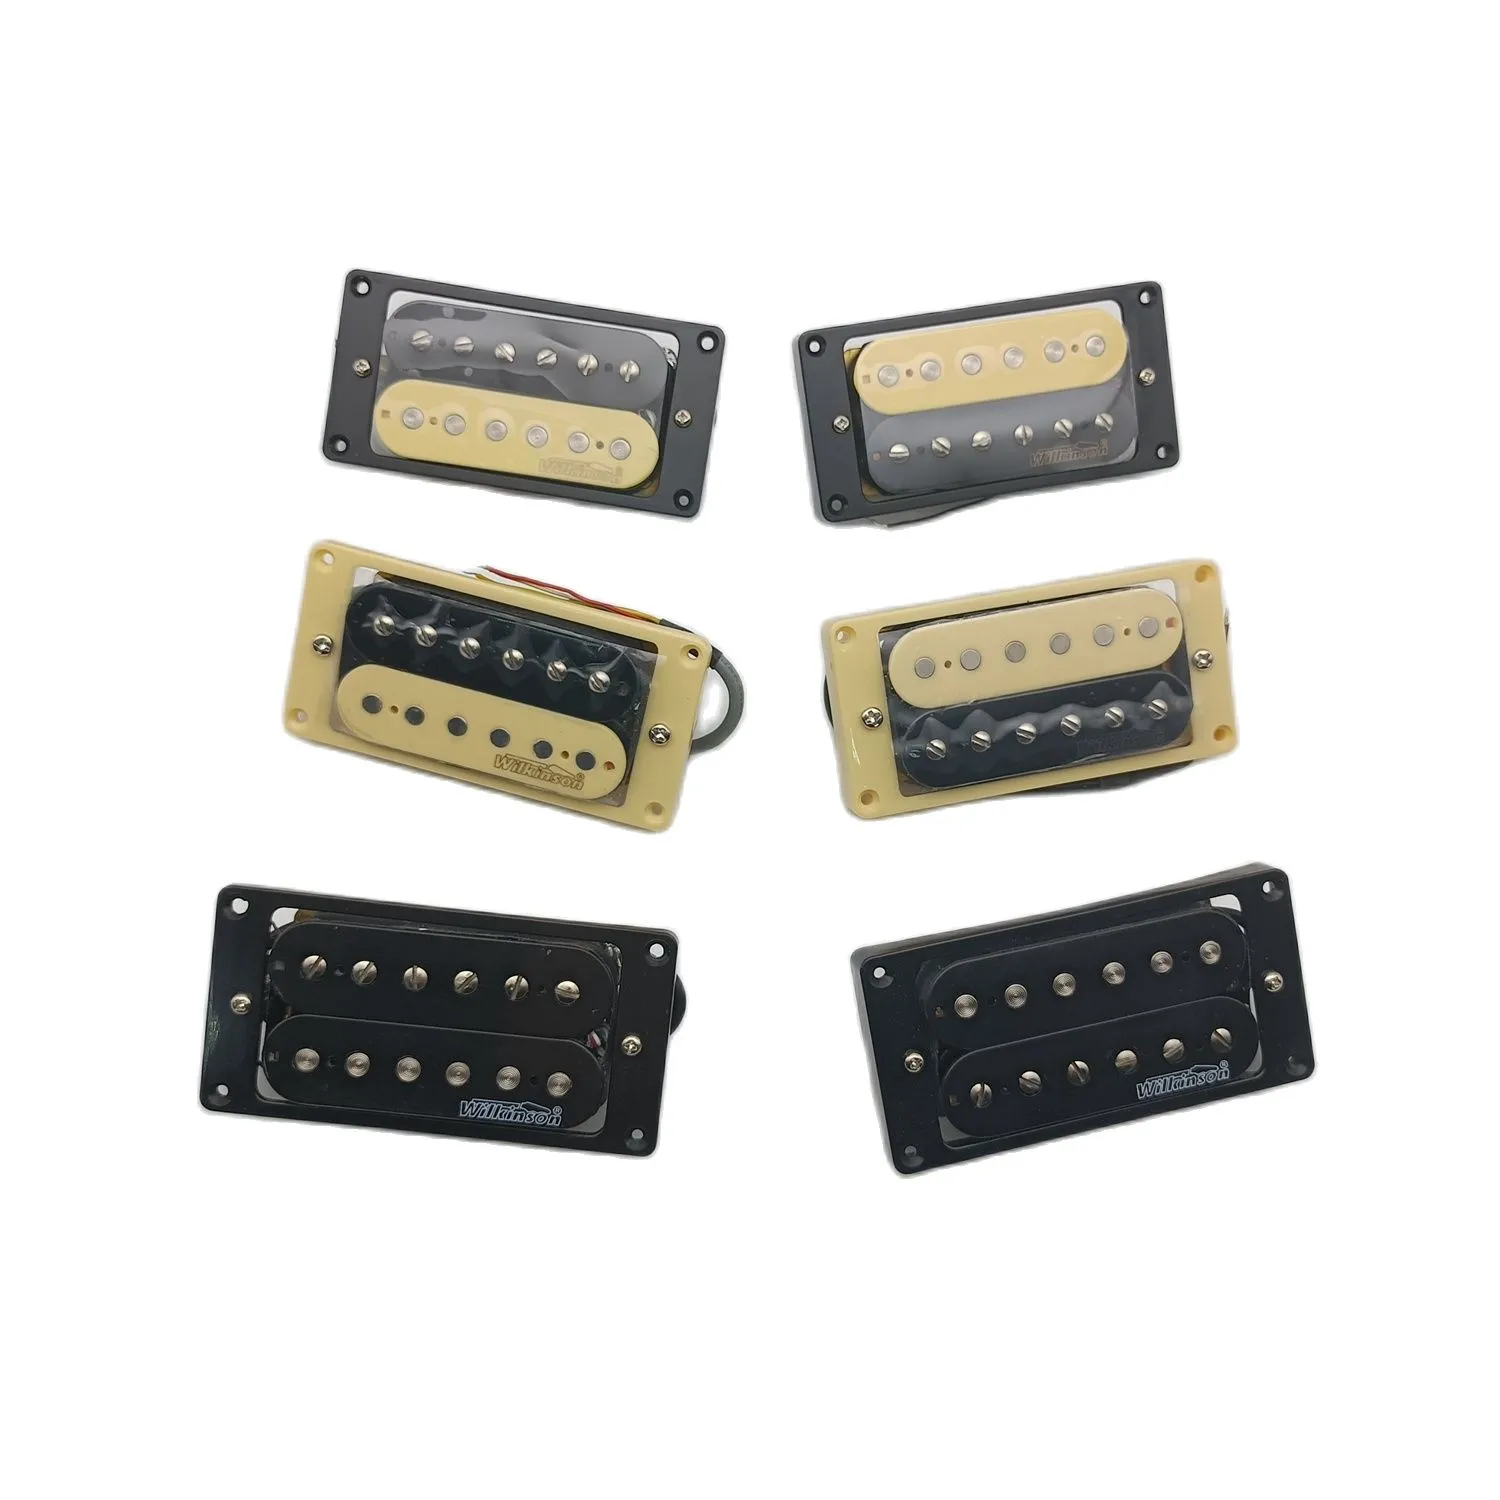 Classic WK Ceramics Humbucker Pickups 4C Conductor with Frame for Gibson Guitar 1 Set